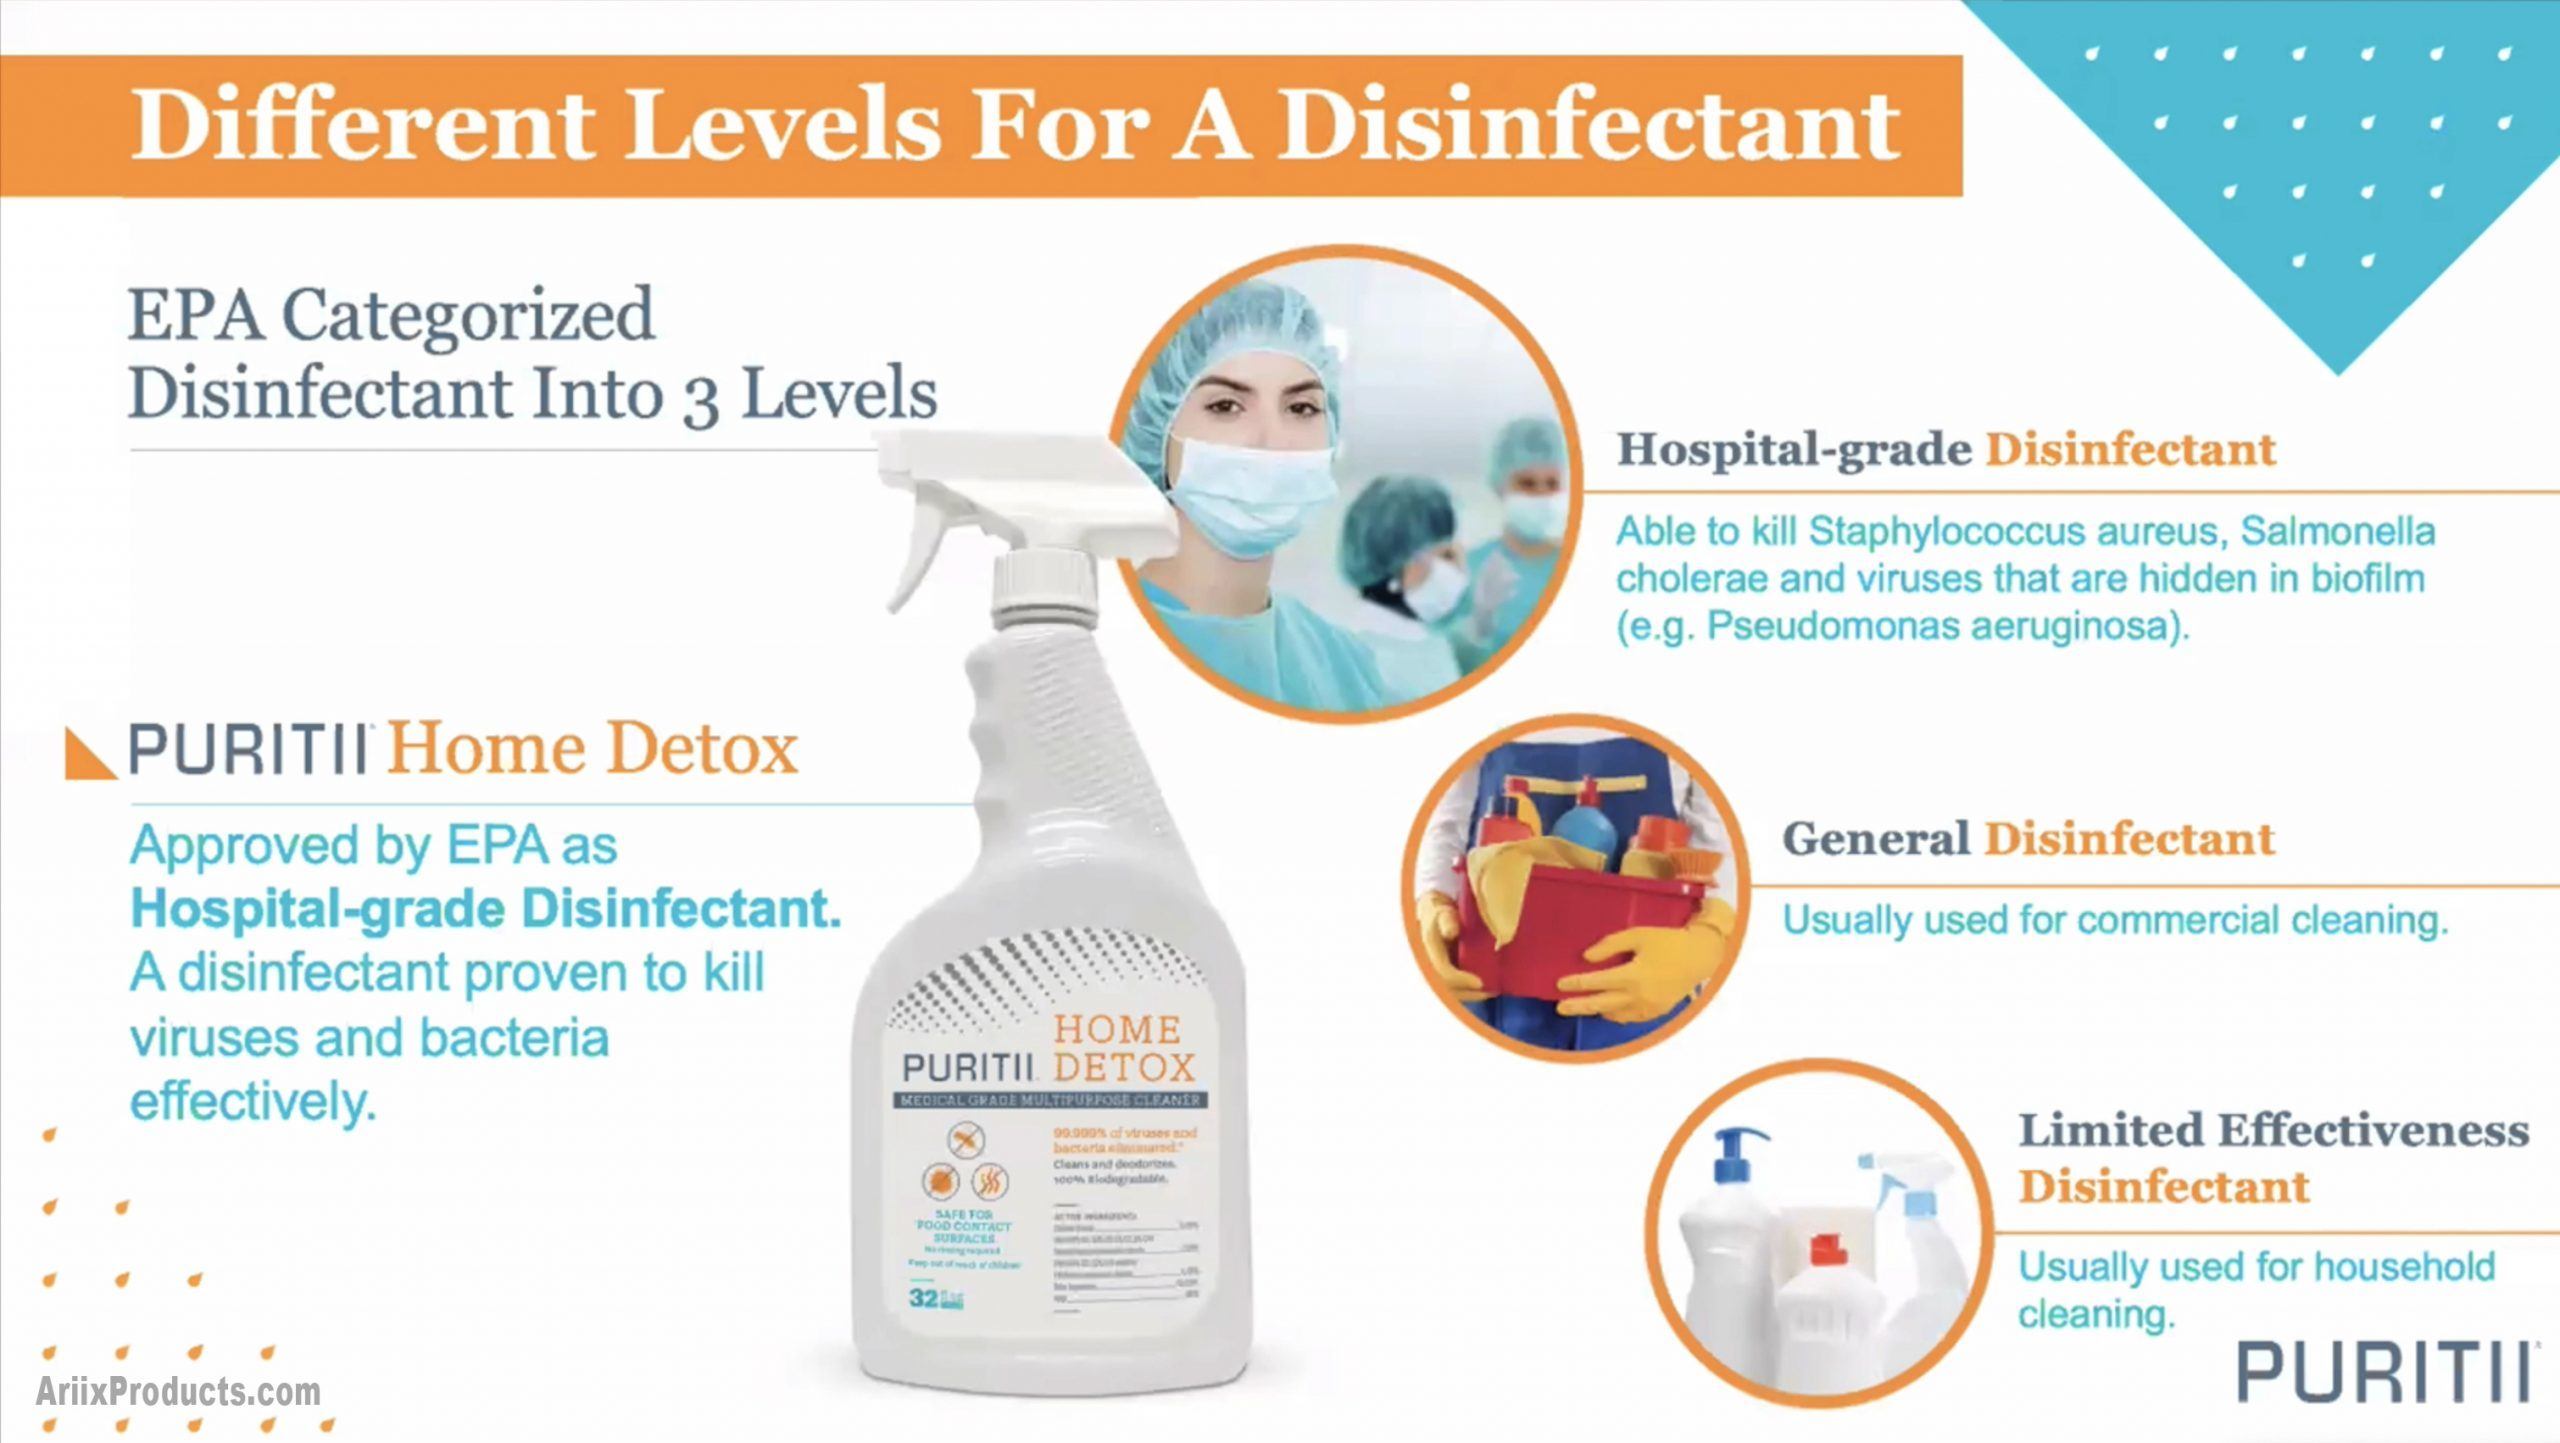 03 DIfferent Levels for a Disinfectant